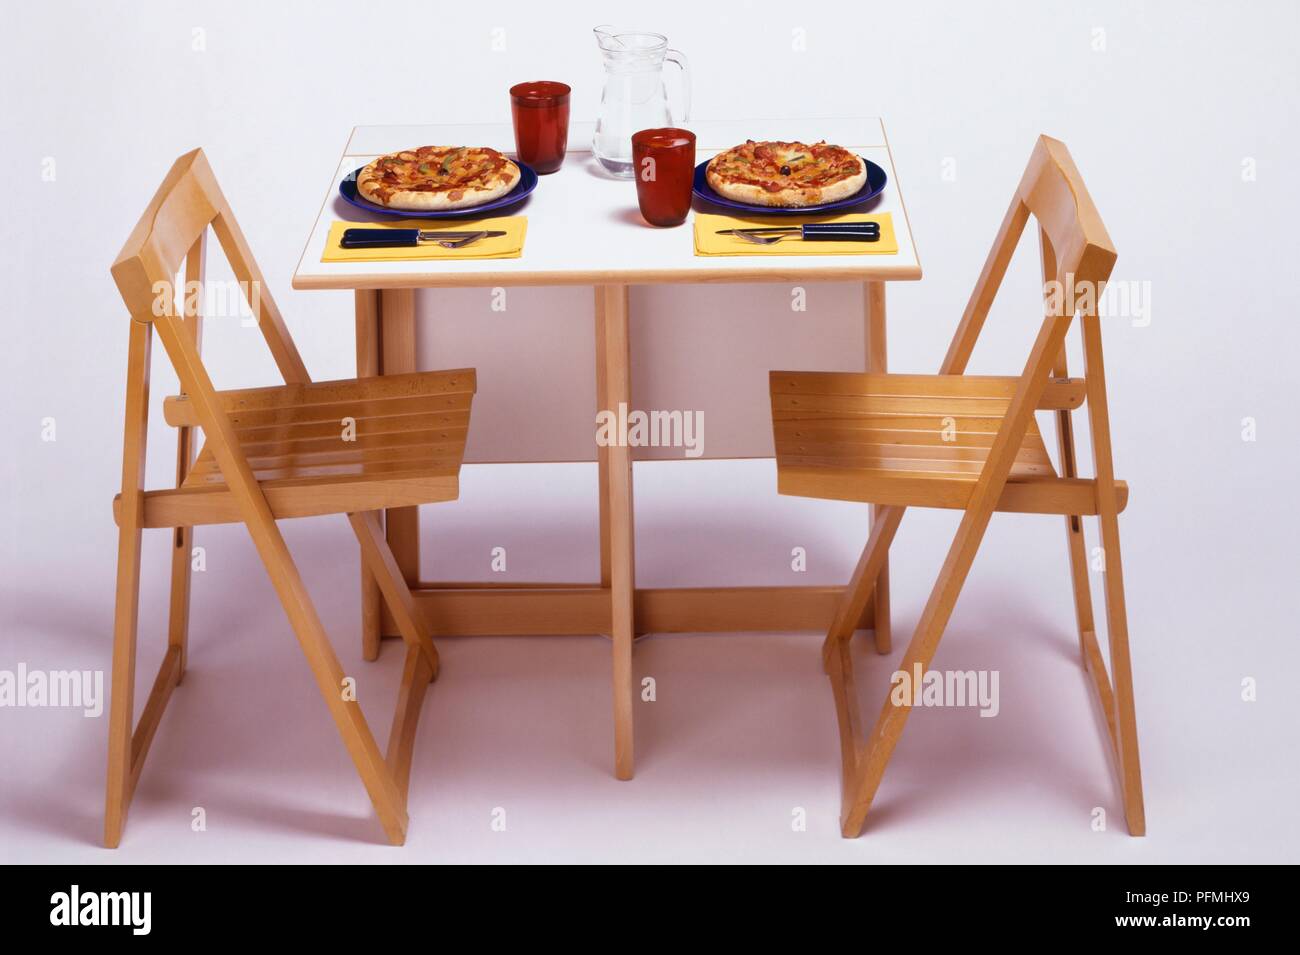 Small Fold Up Table And Chairs Set For Dinner With Pizzas